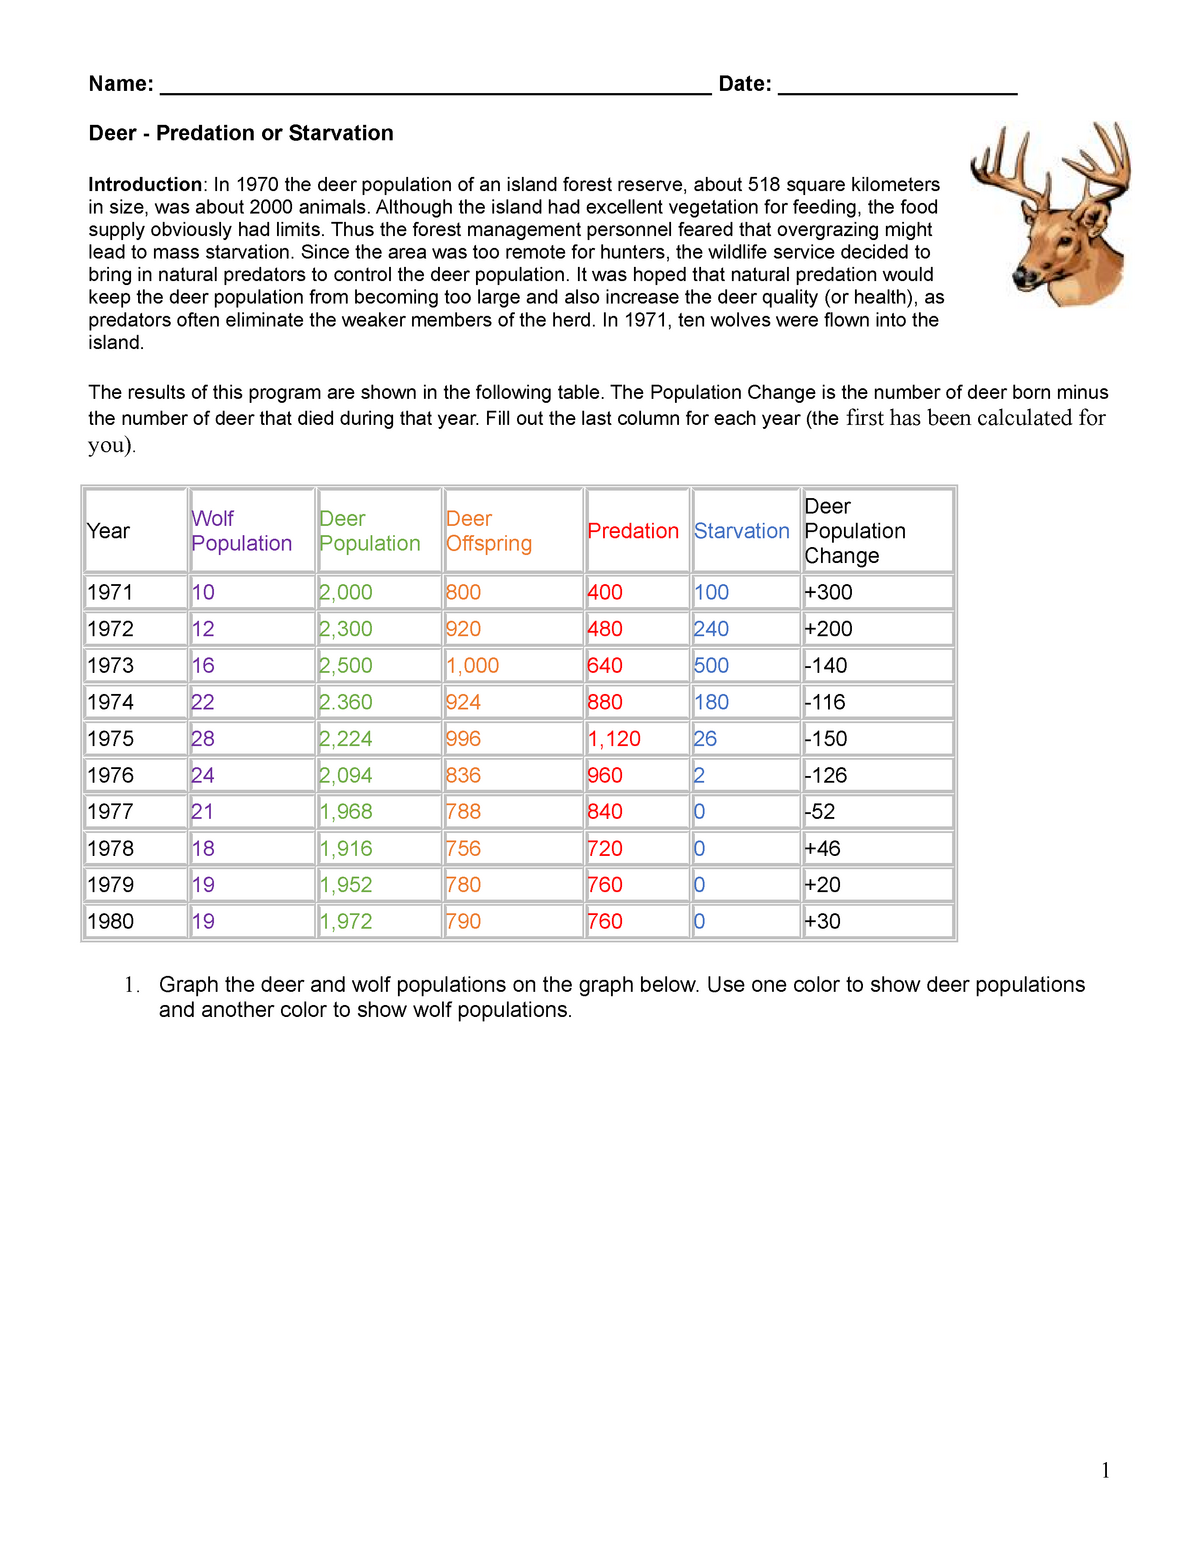 deer-predation-or-starvation-worksheet-answers-recollections-biz